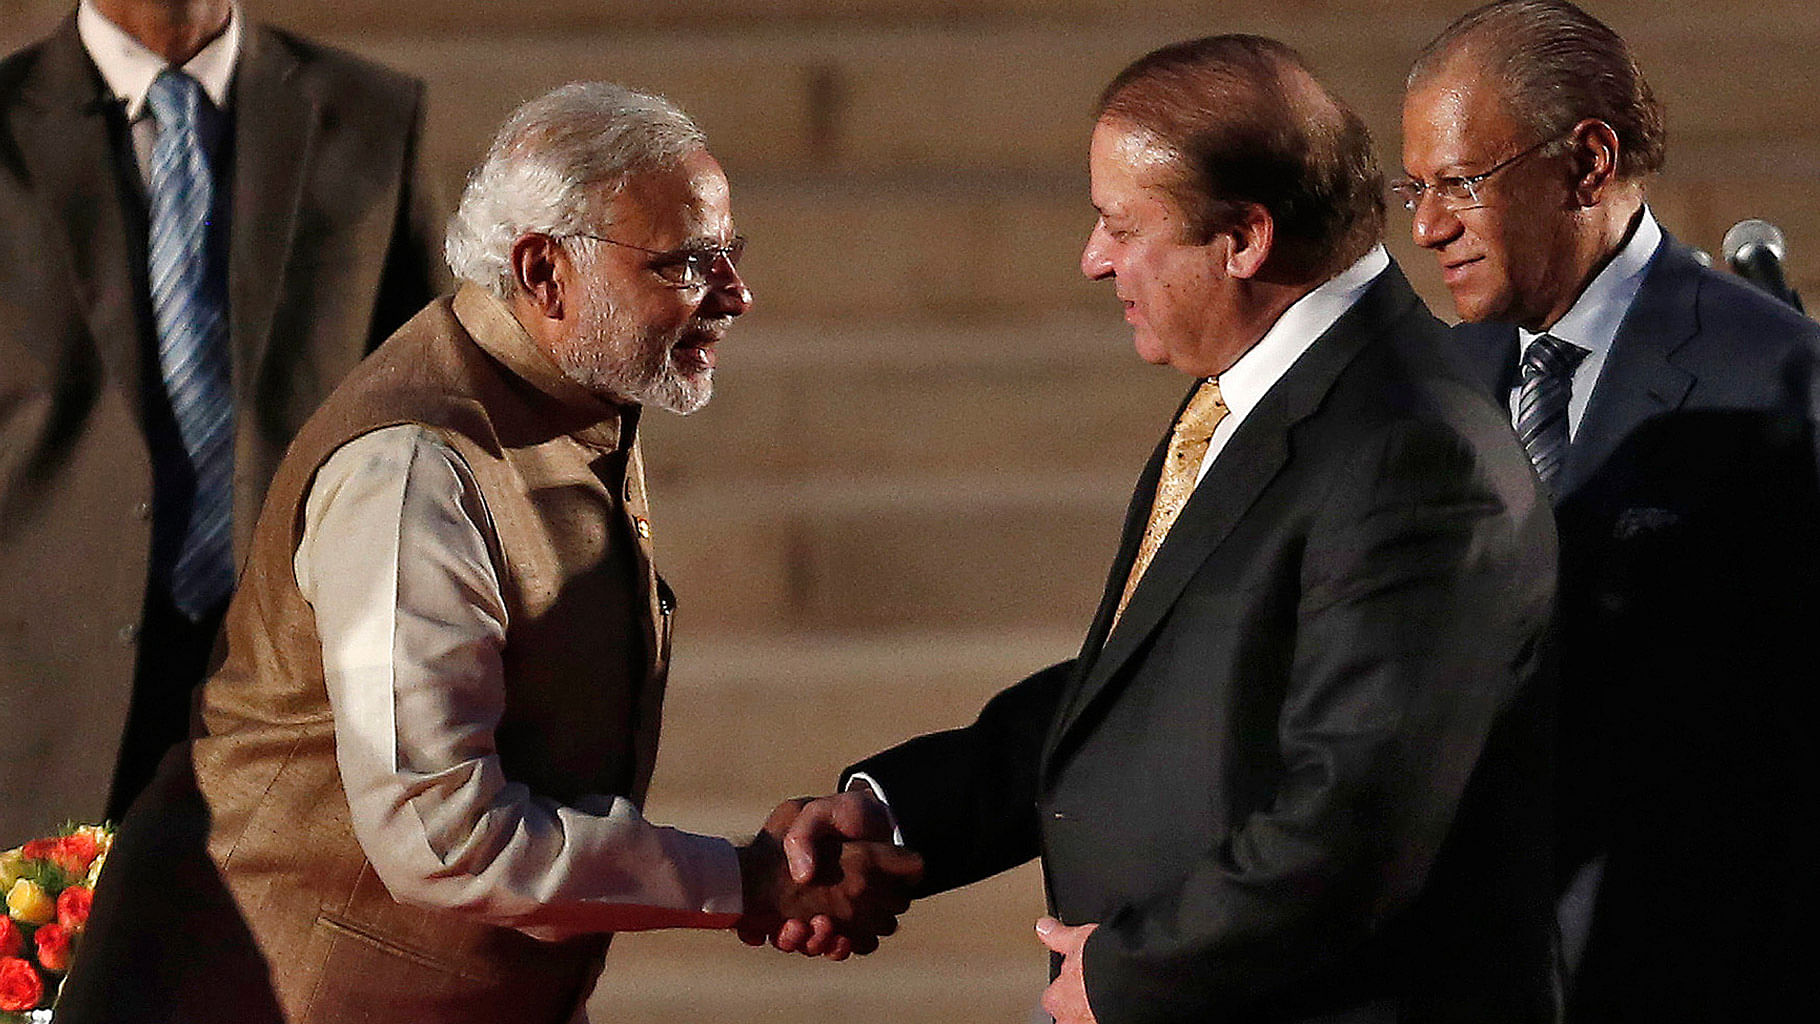 Prime Minister has touched Pakistan’s raw nerve by mentioning Balochistan in his I-day speech. (Photo: Reuters)